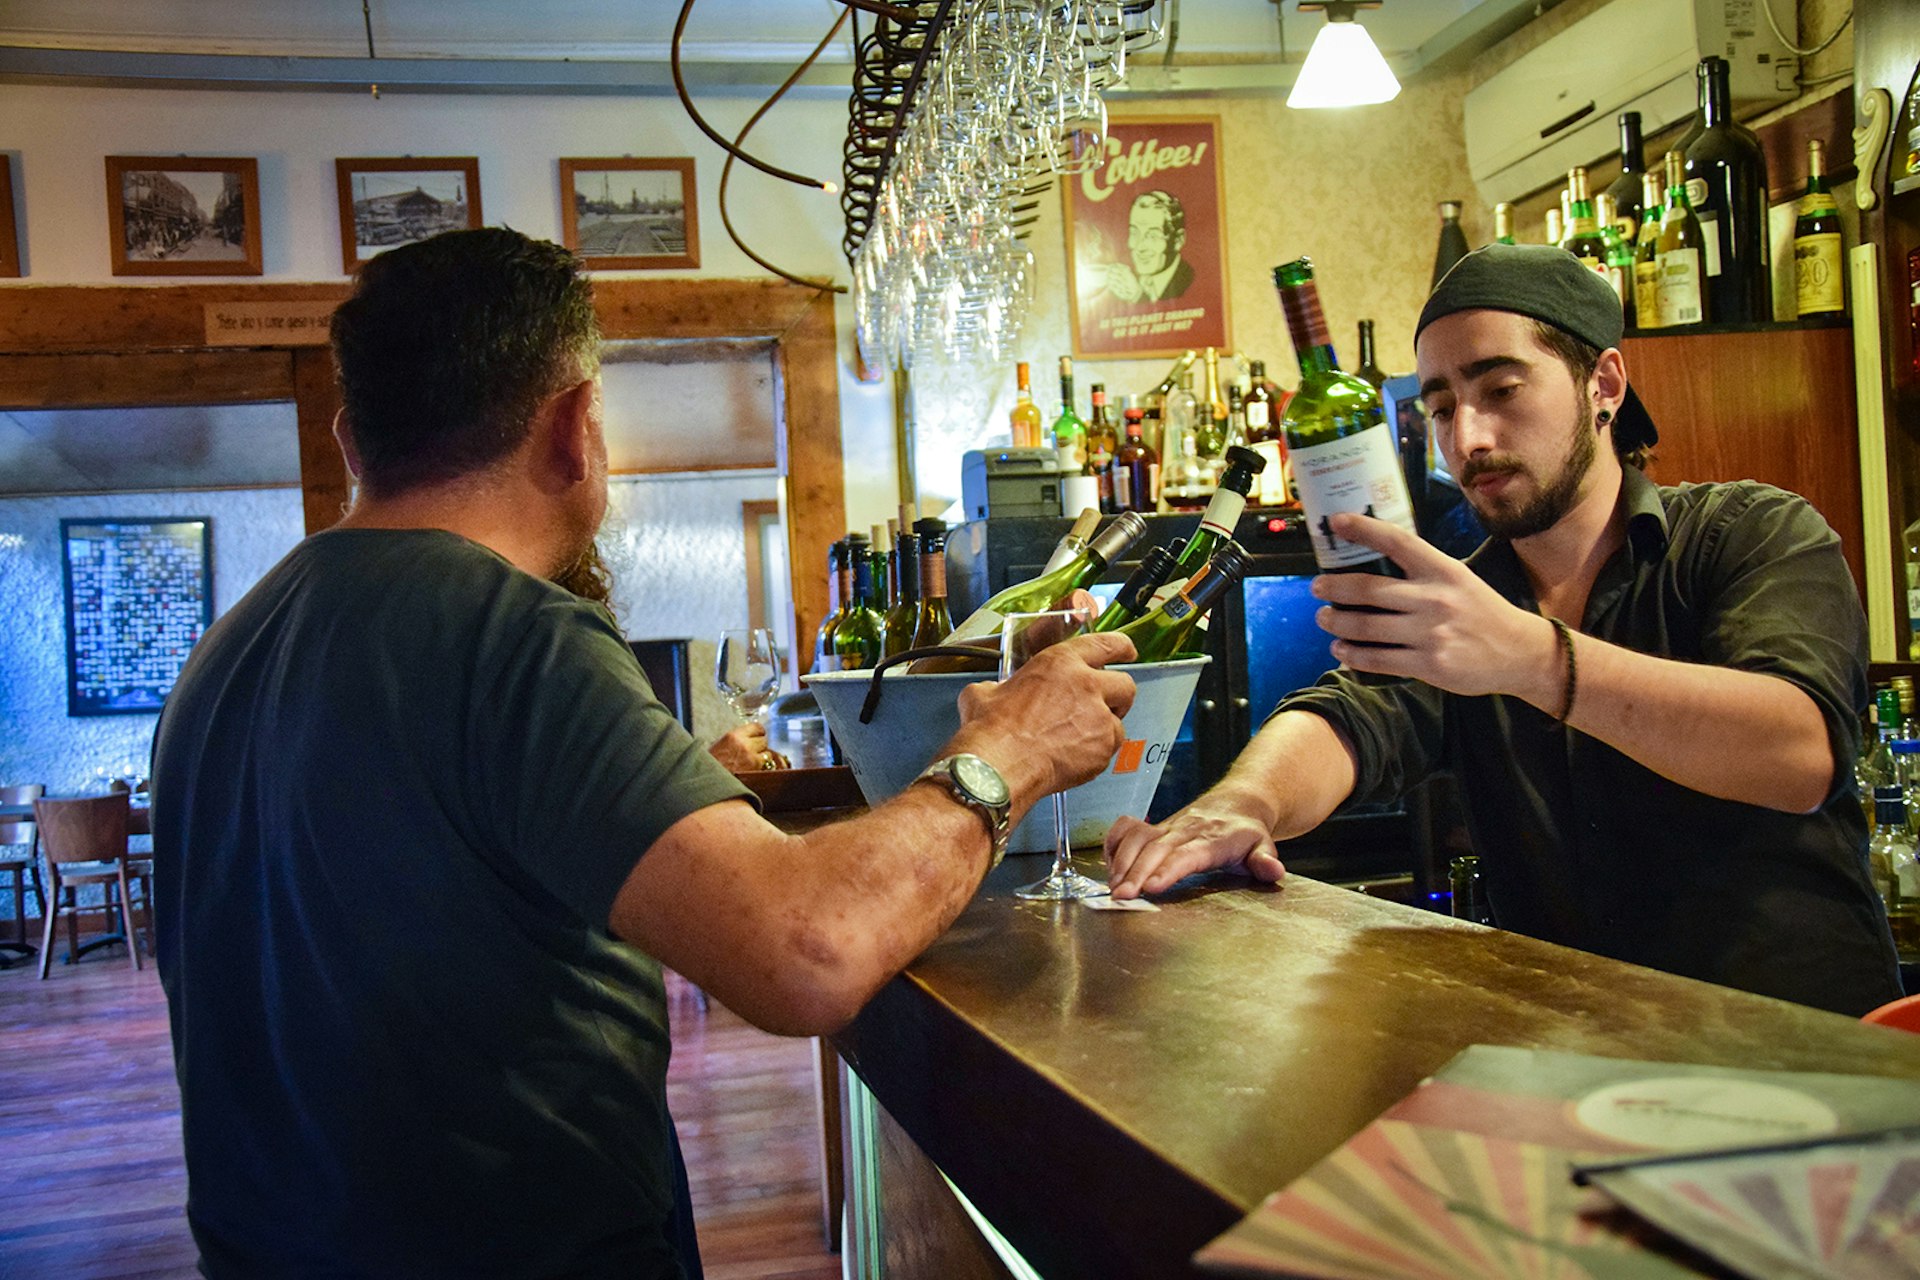 A bartender pours a glass of wine for a patron at a wine bar in Santiago, Chile